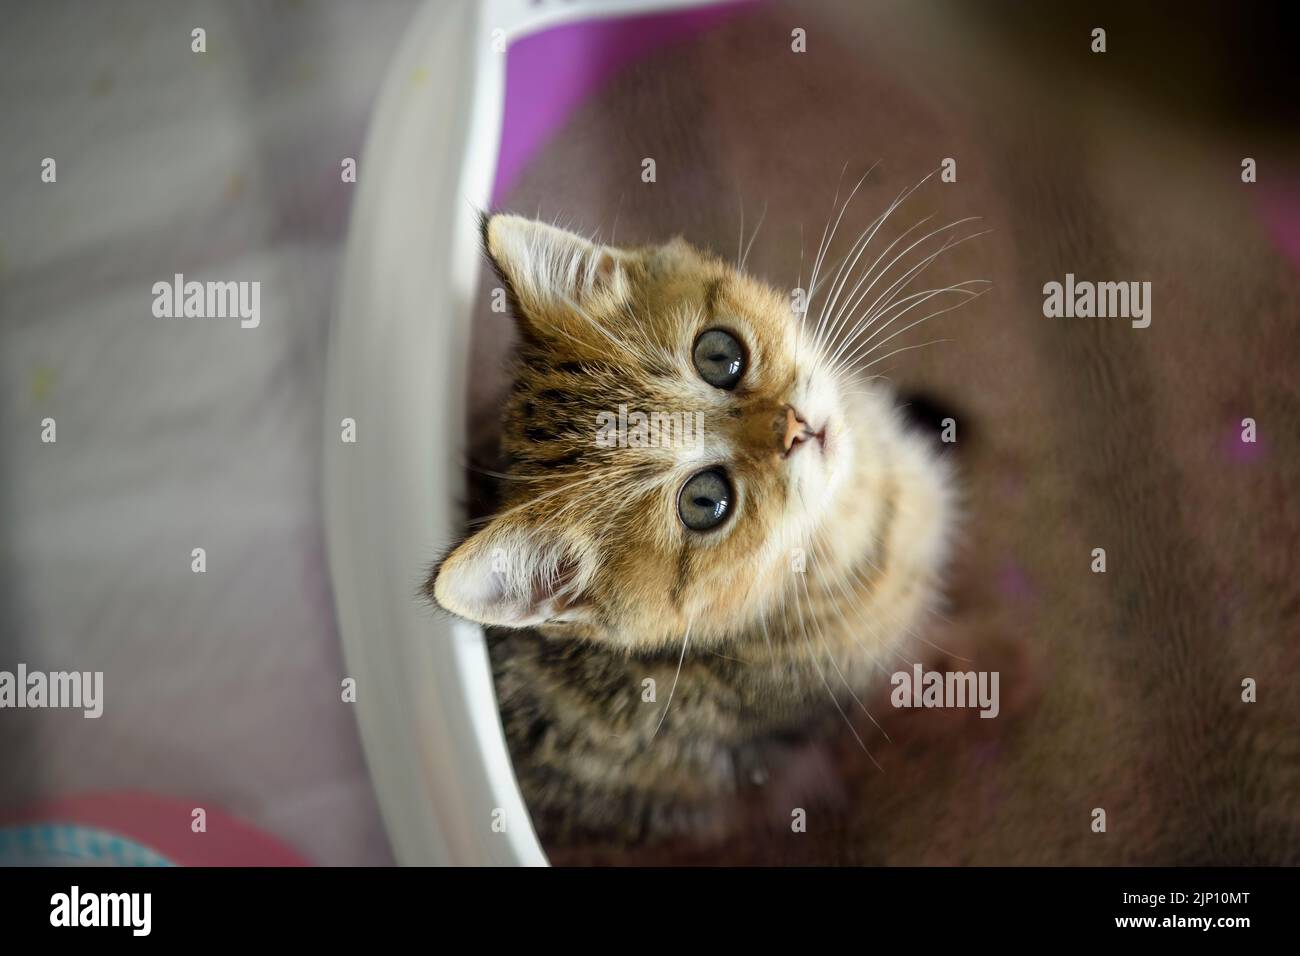 The kitten sat in the cat toilet and looked up. Top view of a striped Scottish cat sitting in a cat litter tray. Cute and beautiful purebred kittens. Stock Photo